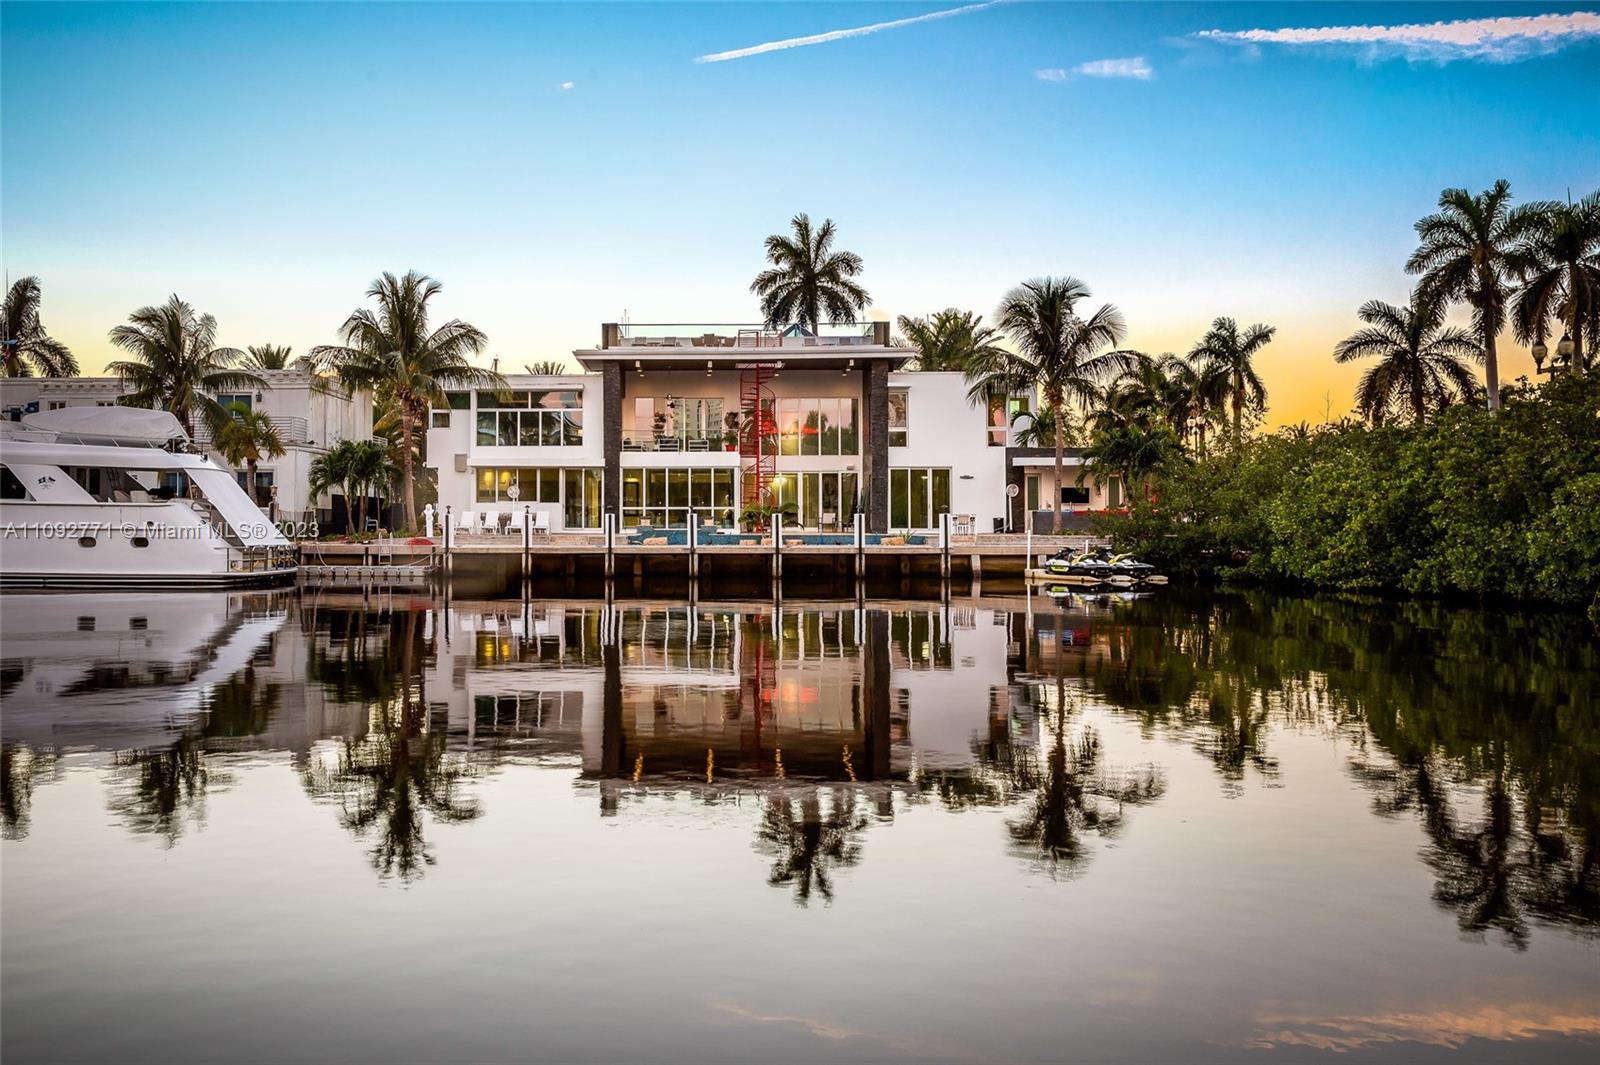 This luxurious and stunning property has 7 beds & 7.5 baths in Las Olas. This gorgeous home was designed with modern luxury in mind and has Italian furniture throughout the interior. Top-of-line chef’s kitchen, gas fireplaces, an elevator, a pristine theatre room, and beautiful ceramic white flooring. This estate comes with access to the intercoastal with a large dock that can accommodate any size vessel up to 90’. This home is within walking distance of restaurants and the beach. This home is the most luxurious property offering all the modern features of impact windows, motorized blinds, multiple ac units, two stoves, and a dishwasher. Outside, enjoy breathtaking views along the outdoor oasis with a beautiful rooftop deck with artificial grass. 60k/month for a year. Can do shorter term.